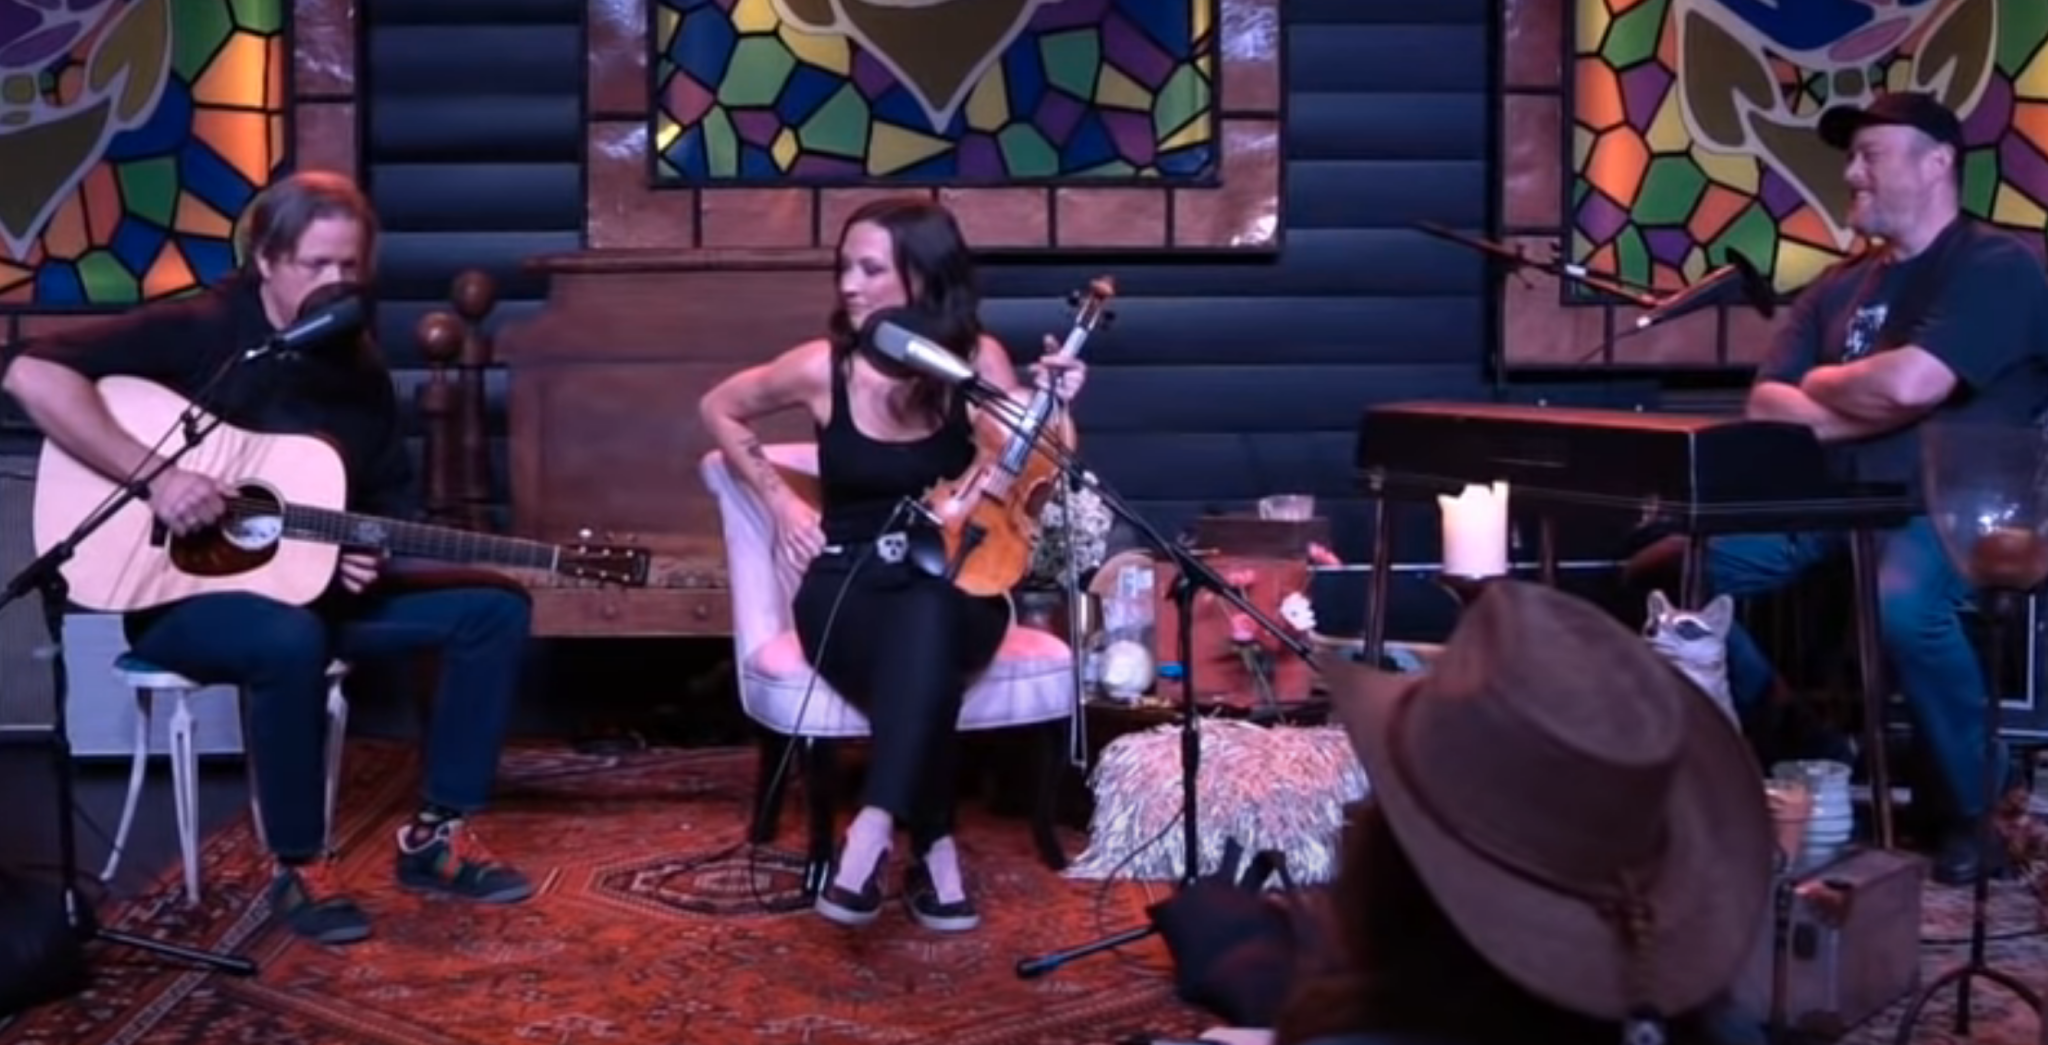 Amanda Shires Offers New Song 'The Problem' for International Safe Abortion Day